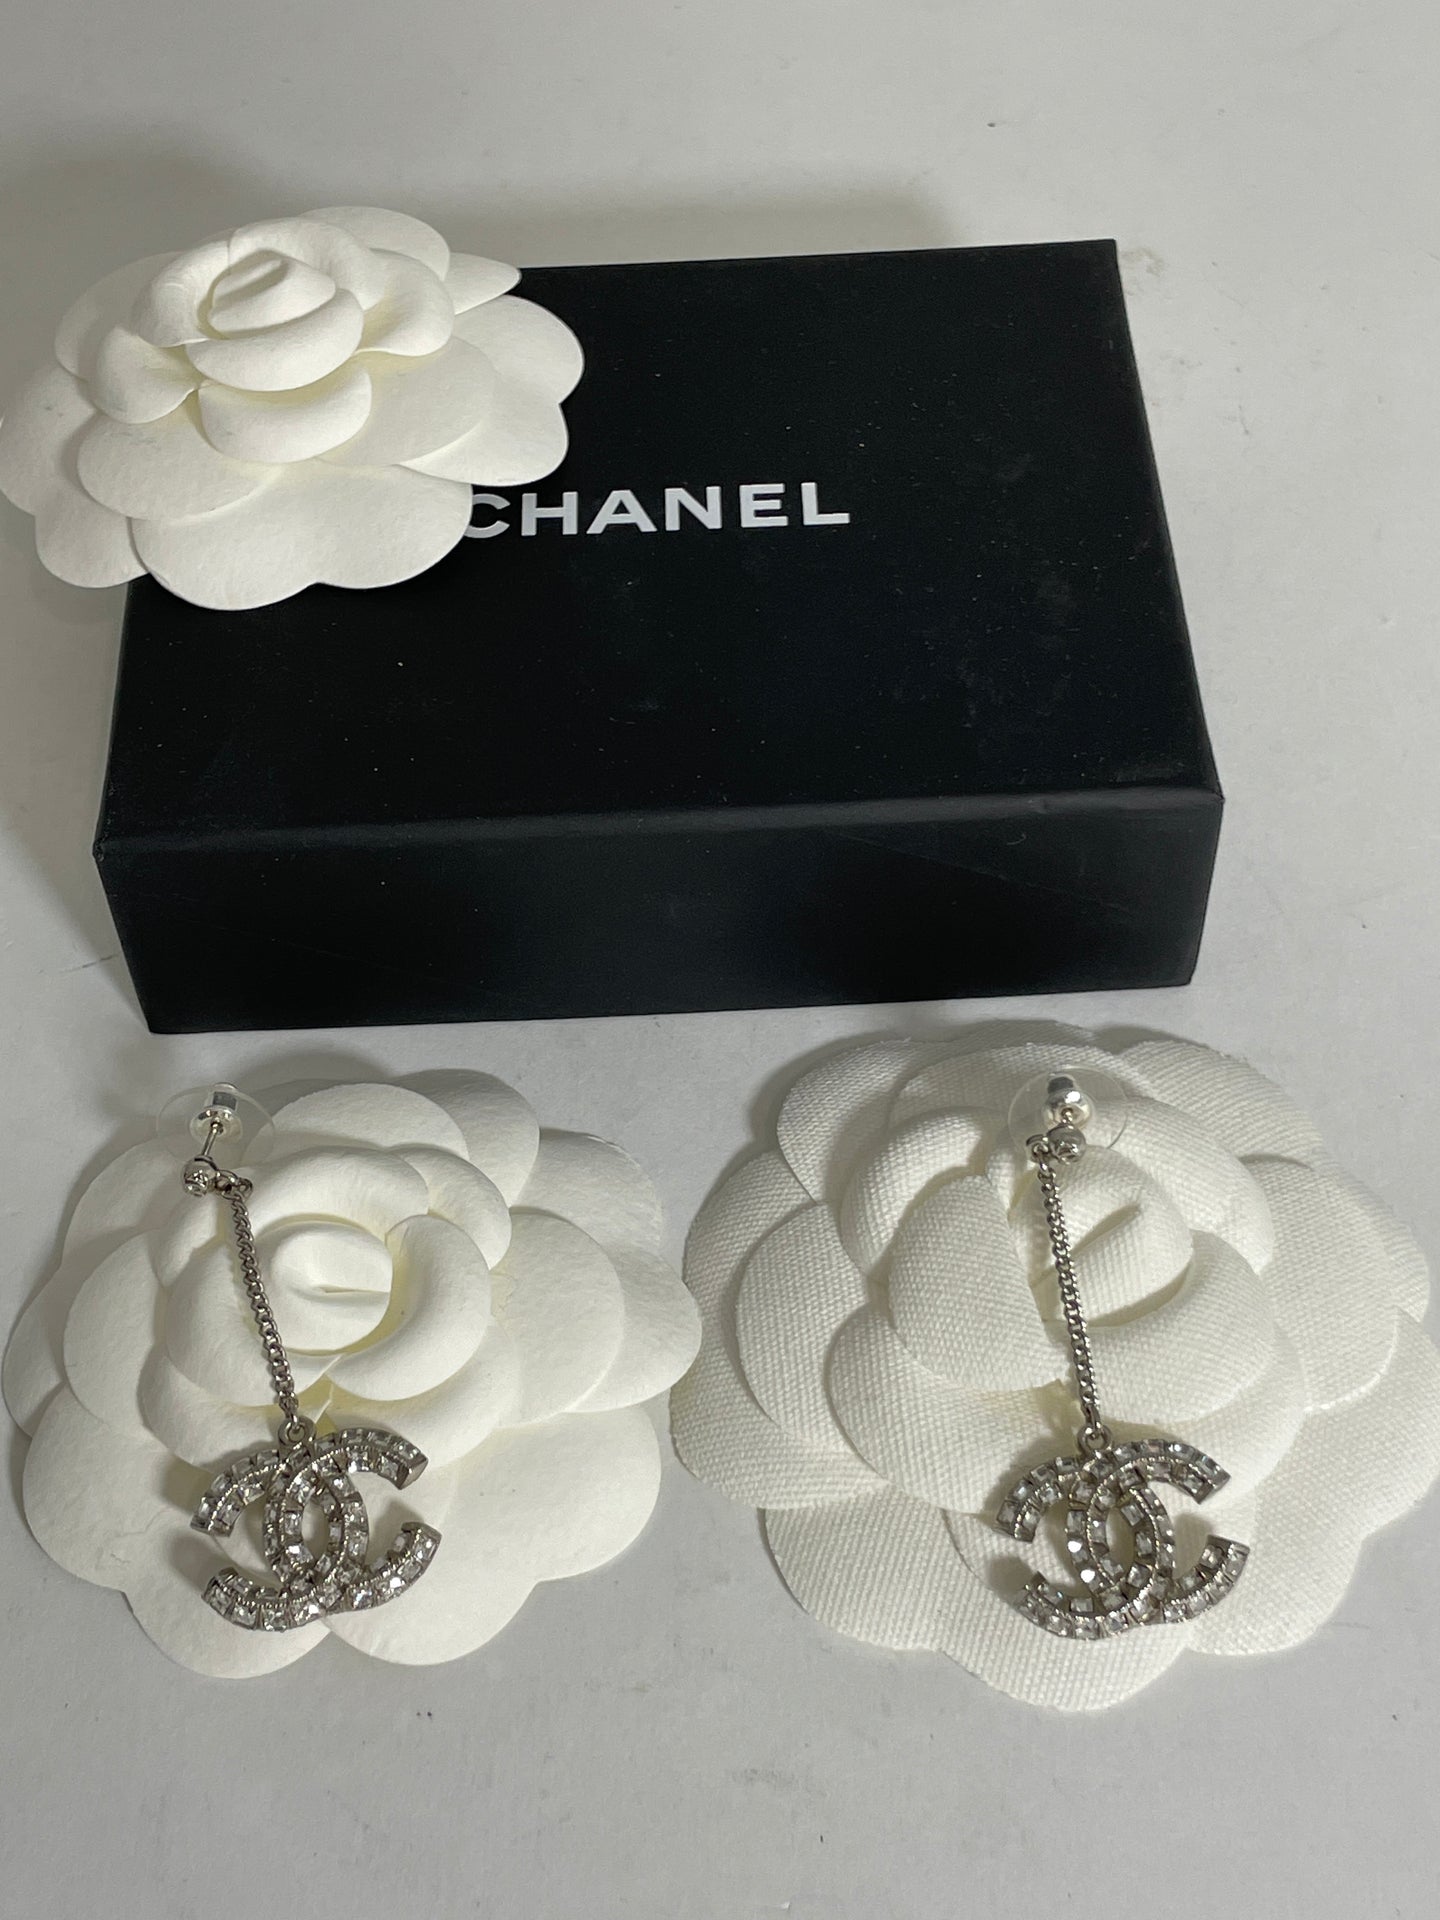 Chanel 22 CC Silver Tone Chain With Drop CC Earrings